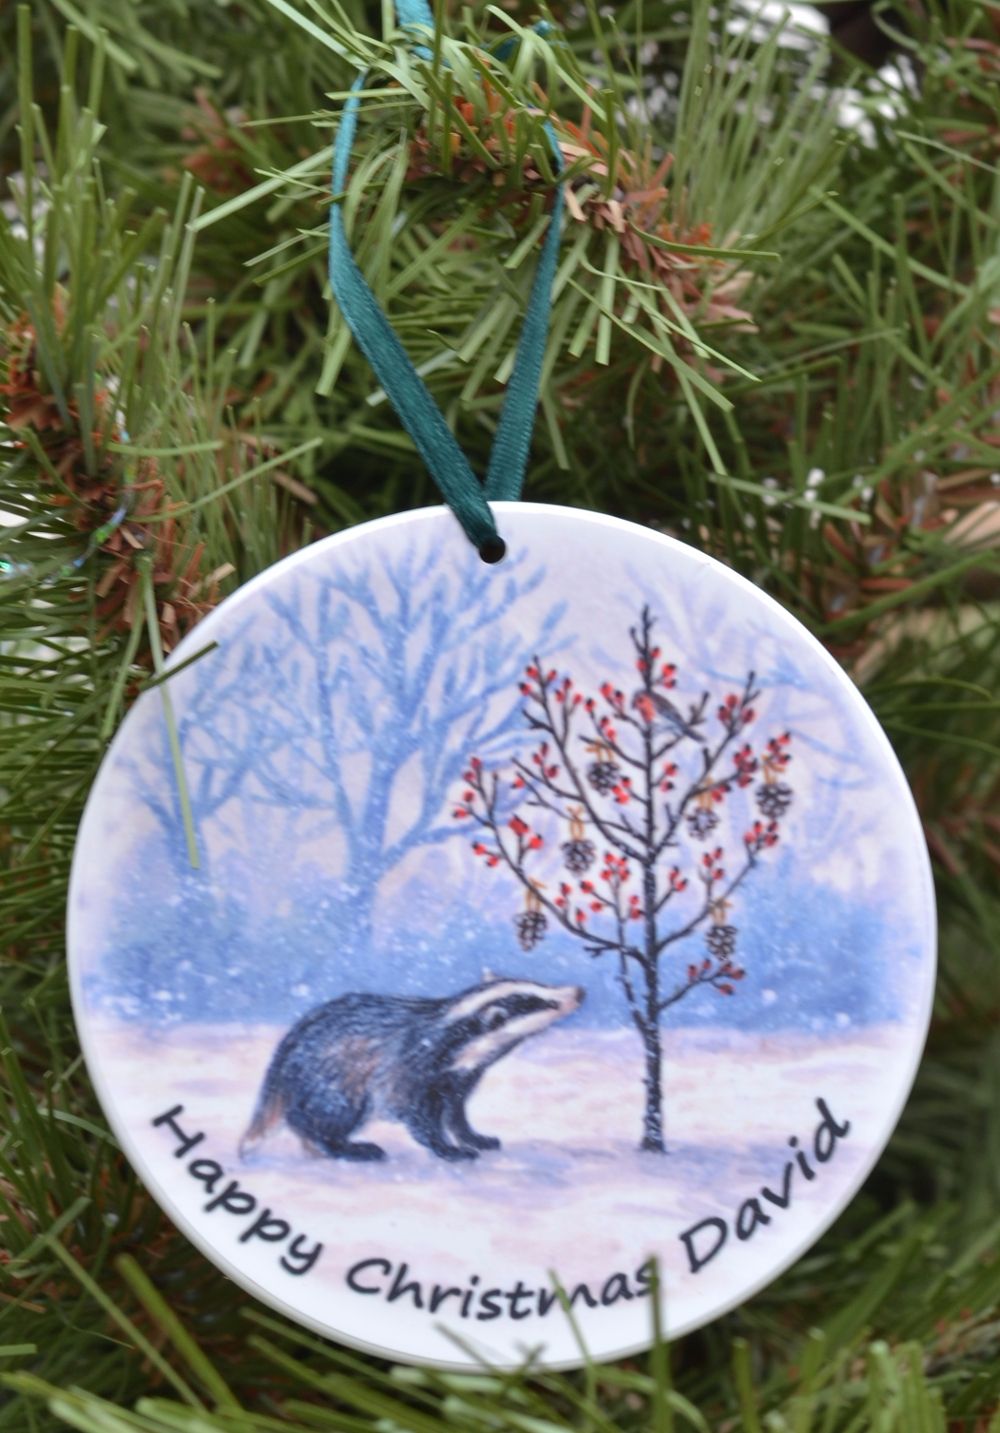 Bauble or Mini Christmas Bags - Badger